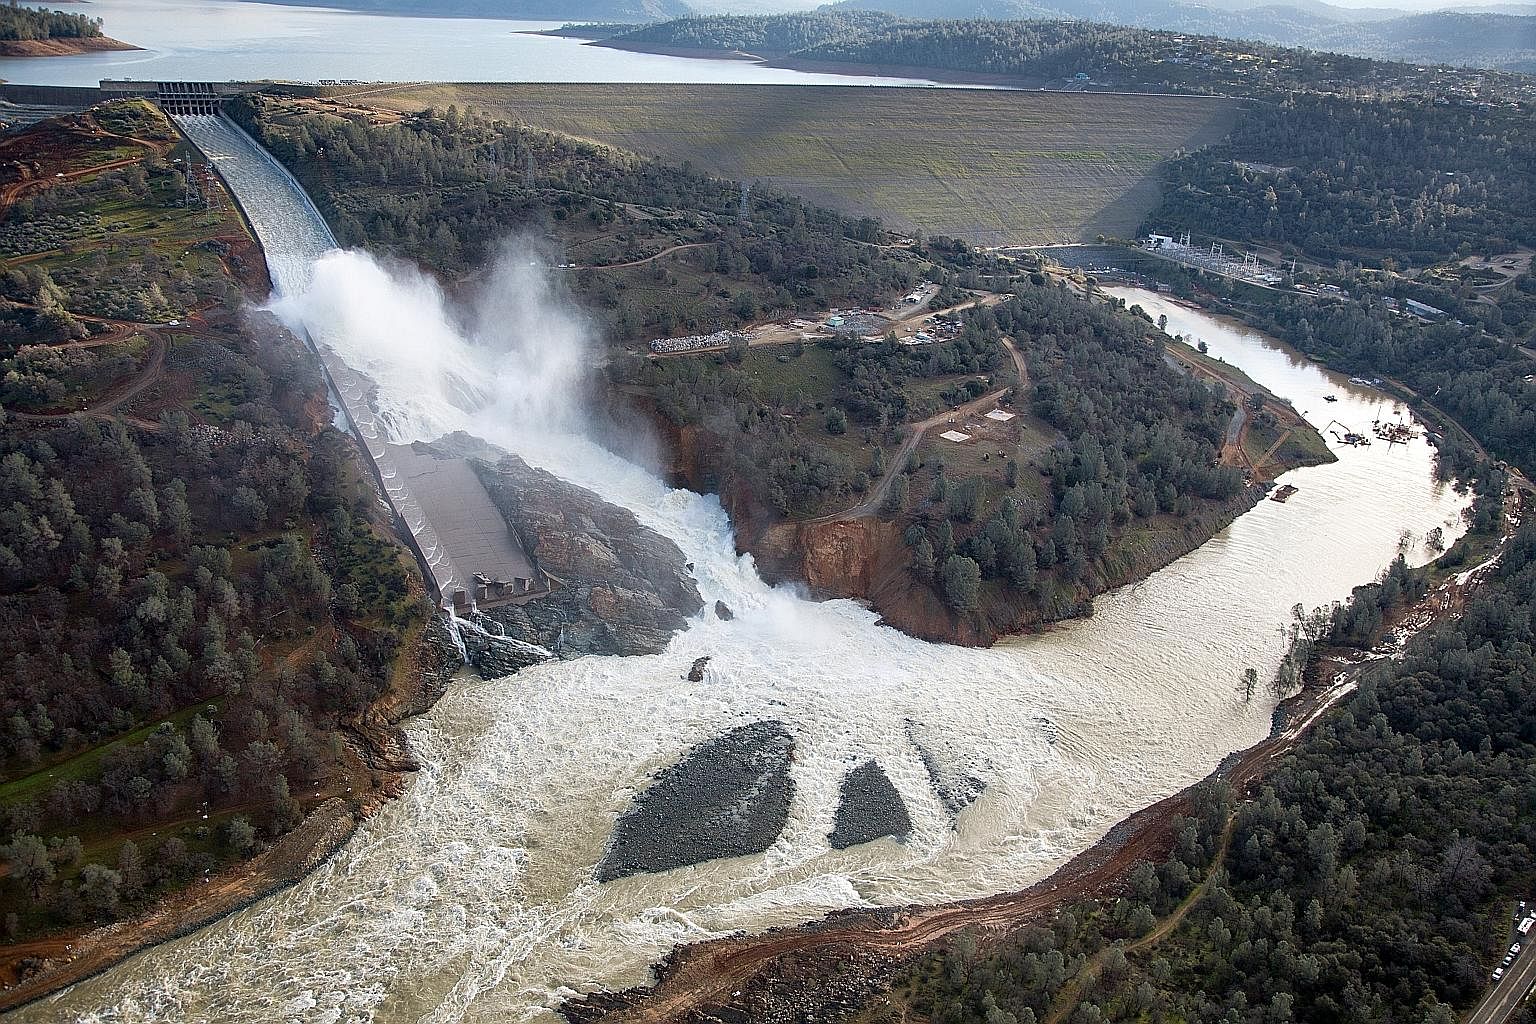 Nearly 200,000 residents had to evacuate their homes in February because of a damaged spillway at California's Oroville dam, built in 1968.